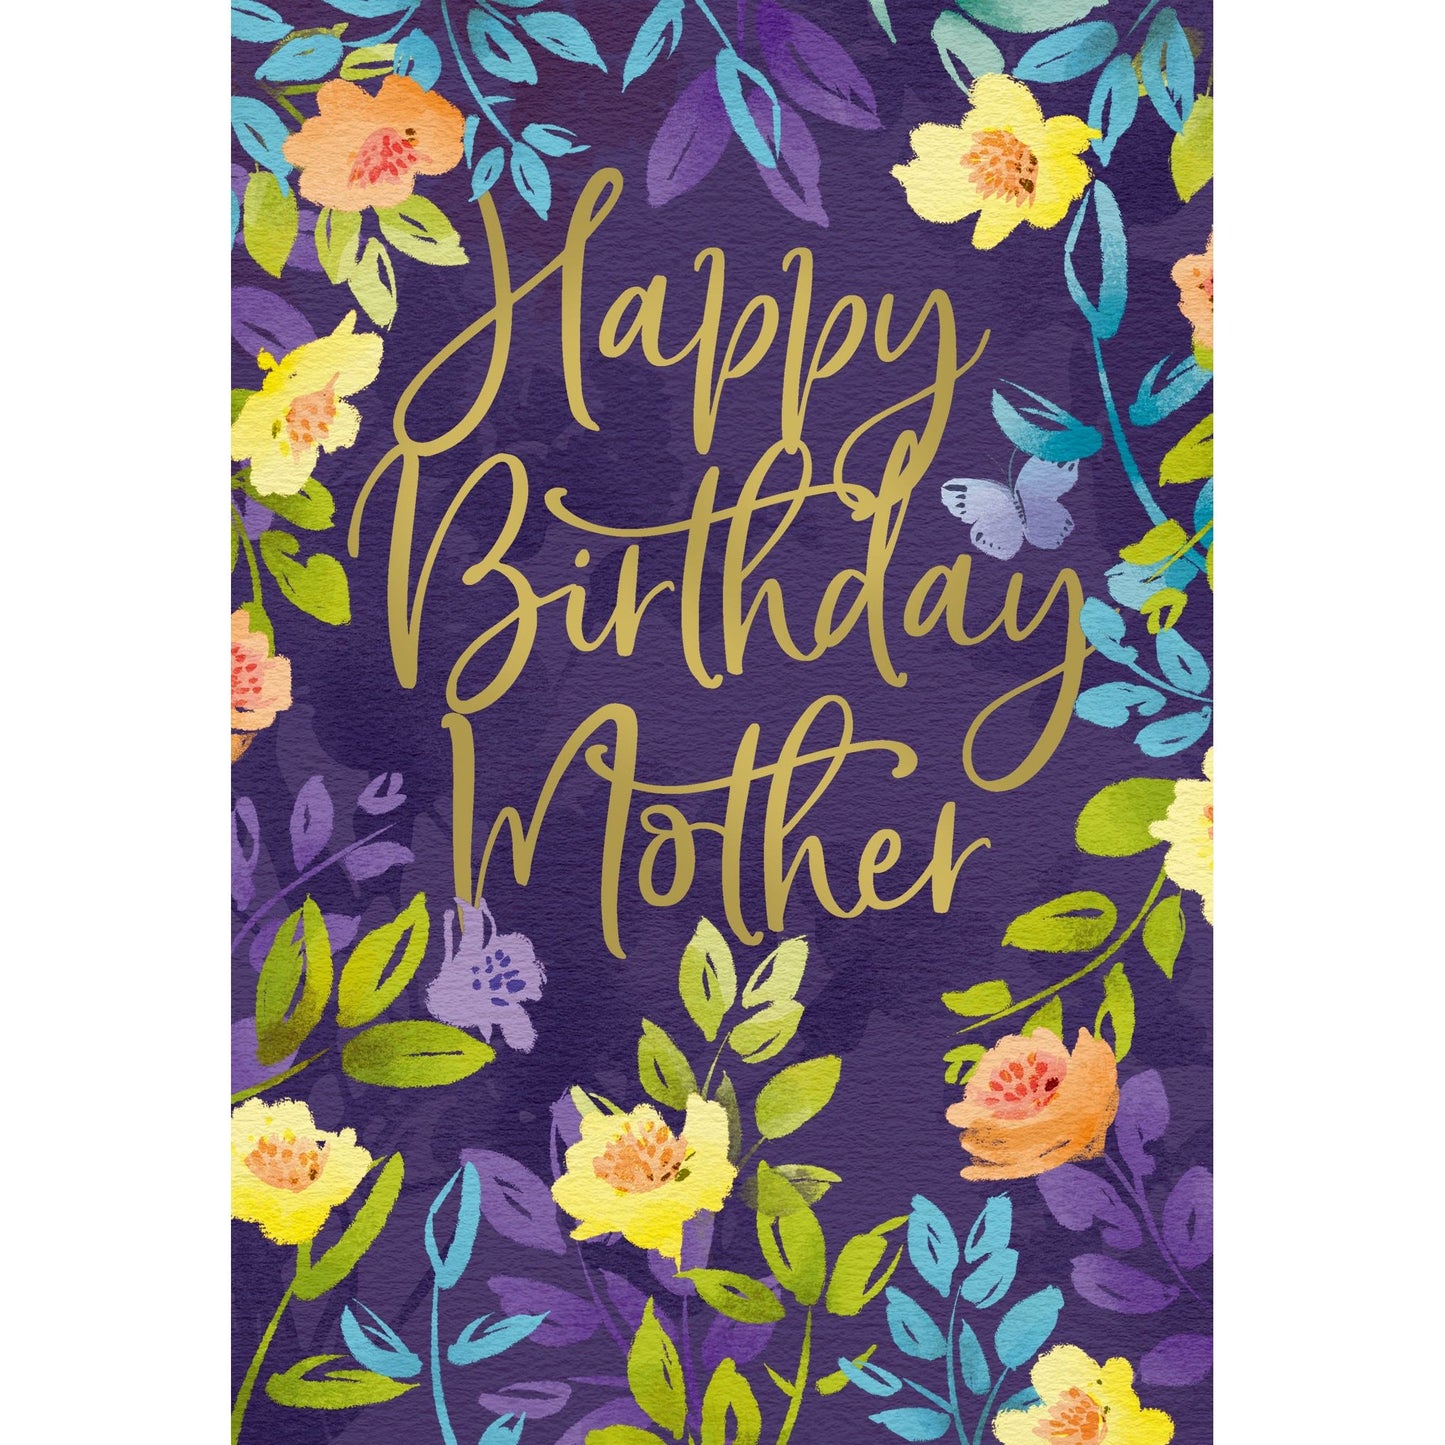 Birthday Mother Card Floral Frame - Cardmore